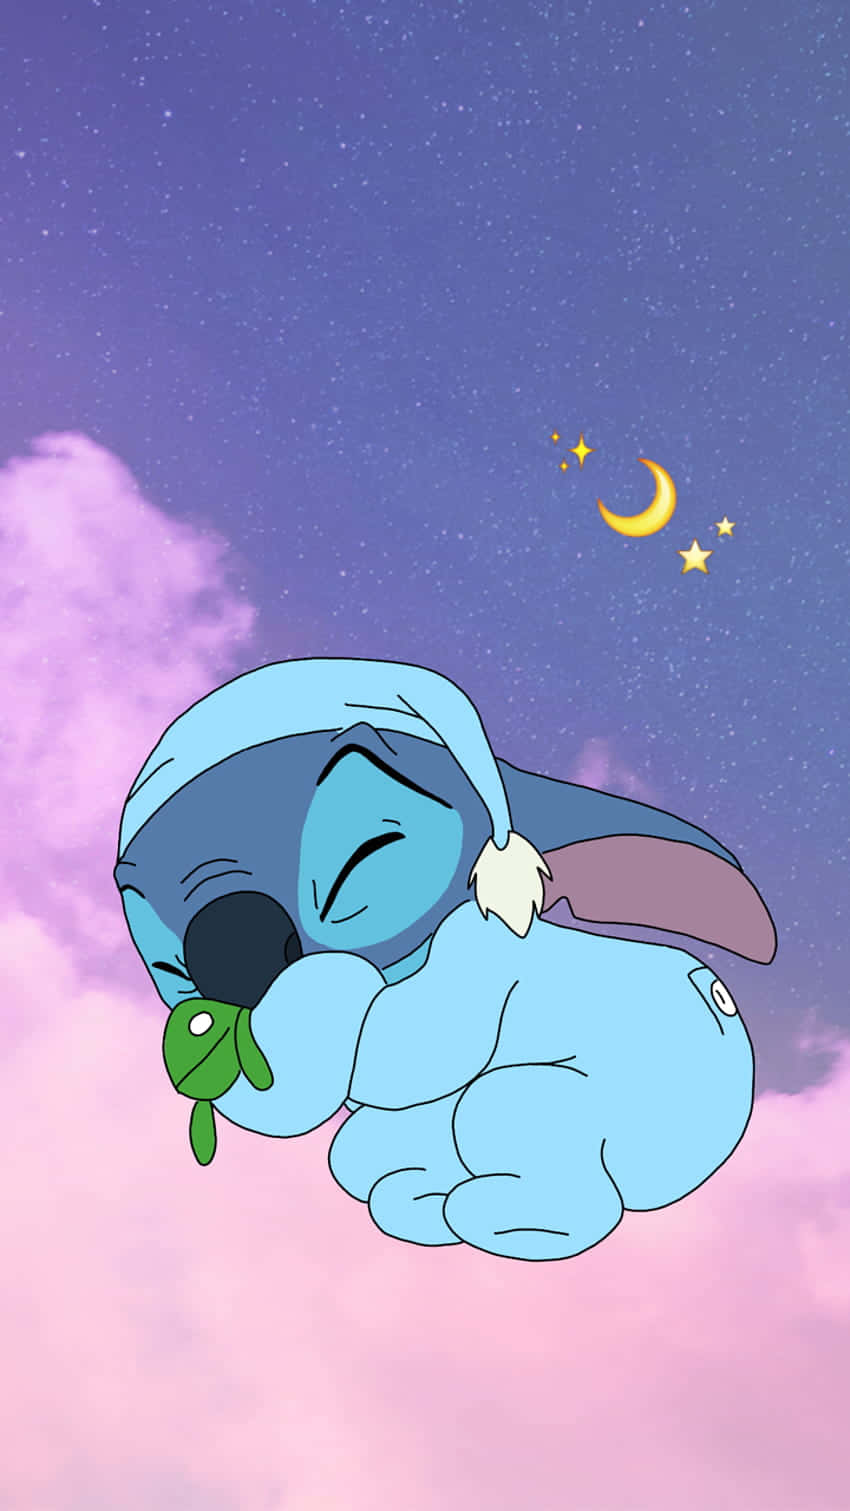 stitch sleeping in the sky with a star Wallpaper